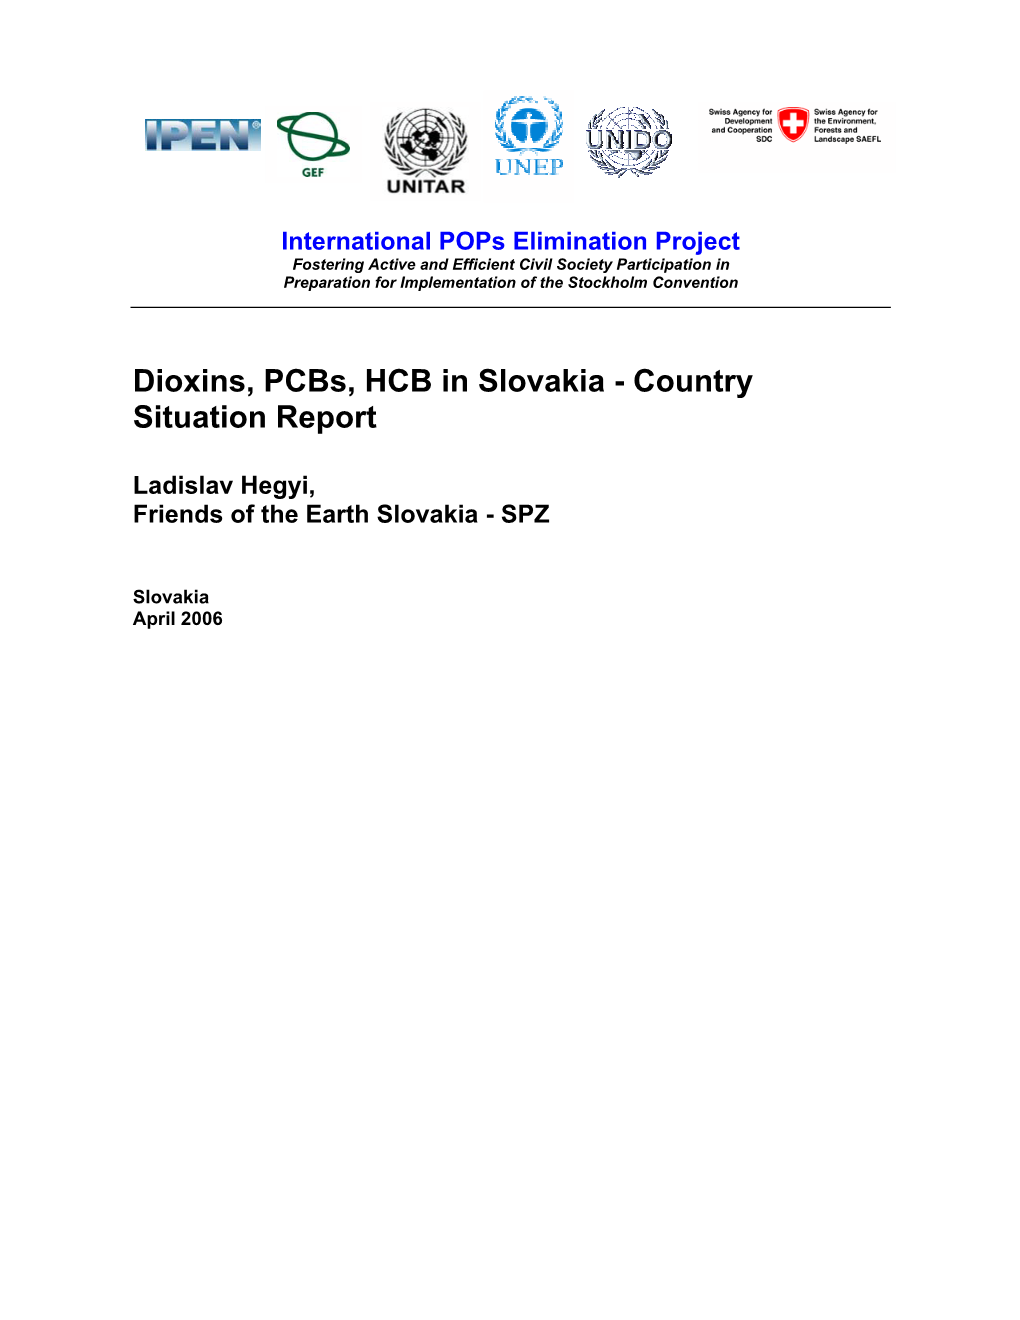 Dioxins, Pcbs, HCB in Slovakia - Country Situation Report